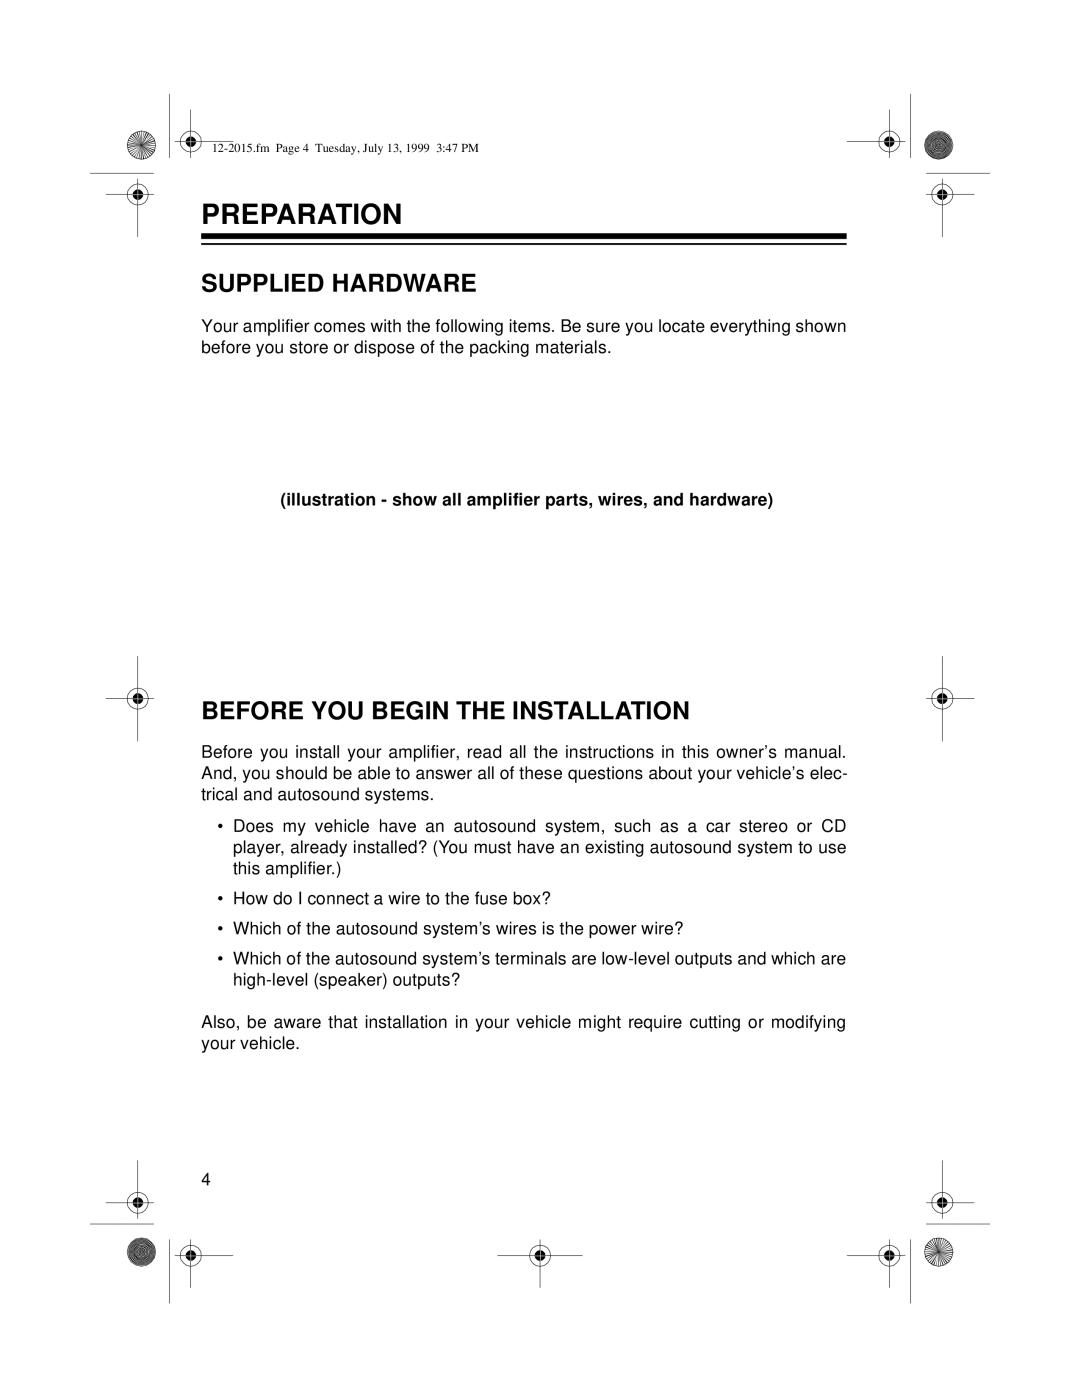 Radio Shack XL-150 owner manual Preparation, Supplied Hardware, Before You Begin The Installation 